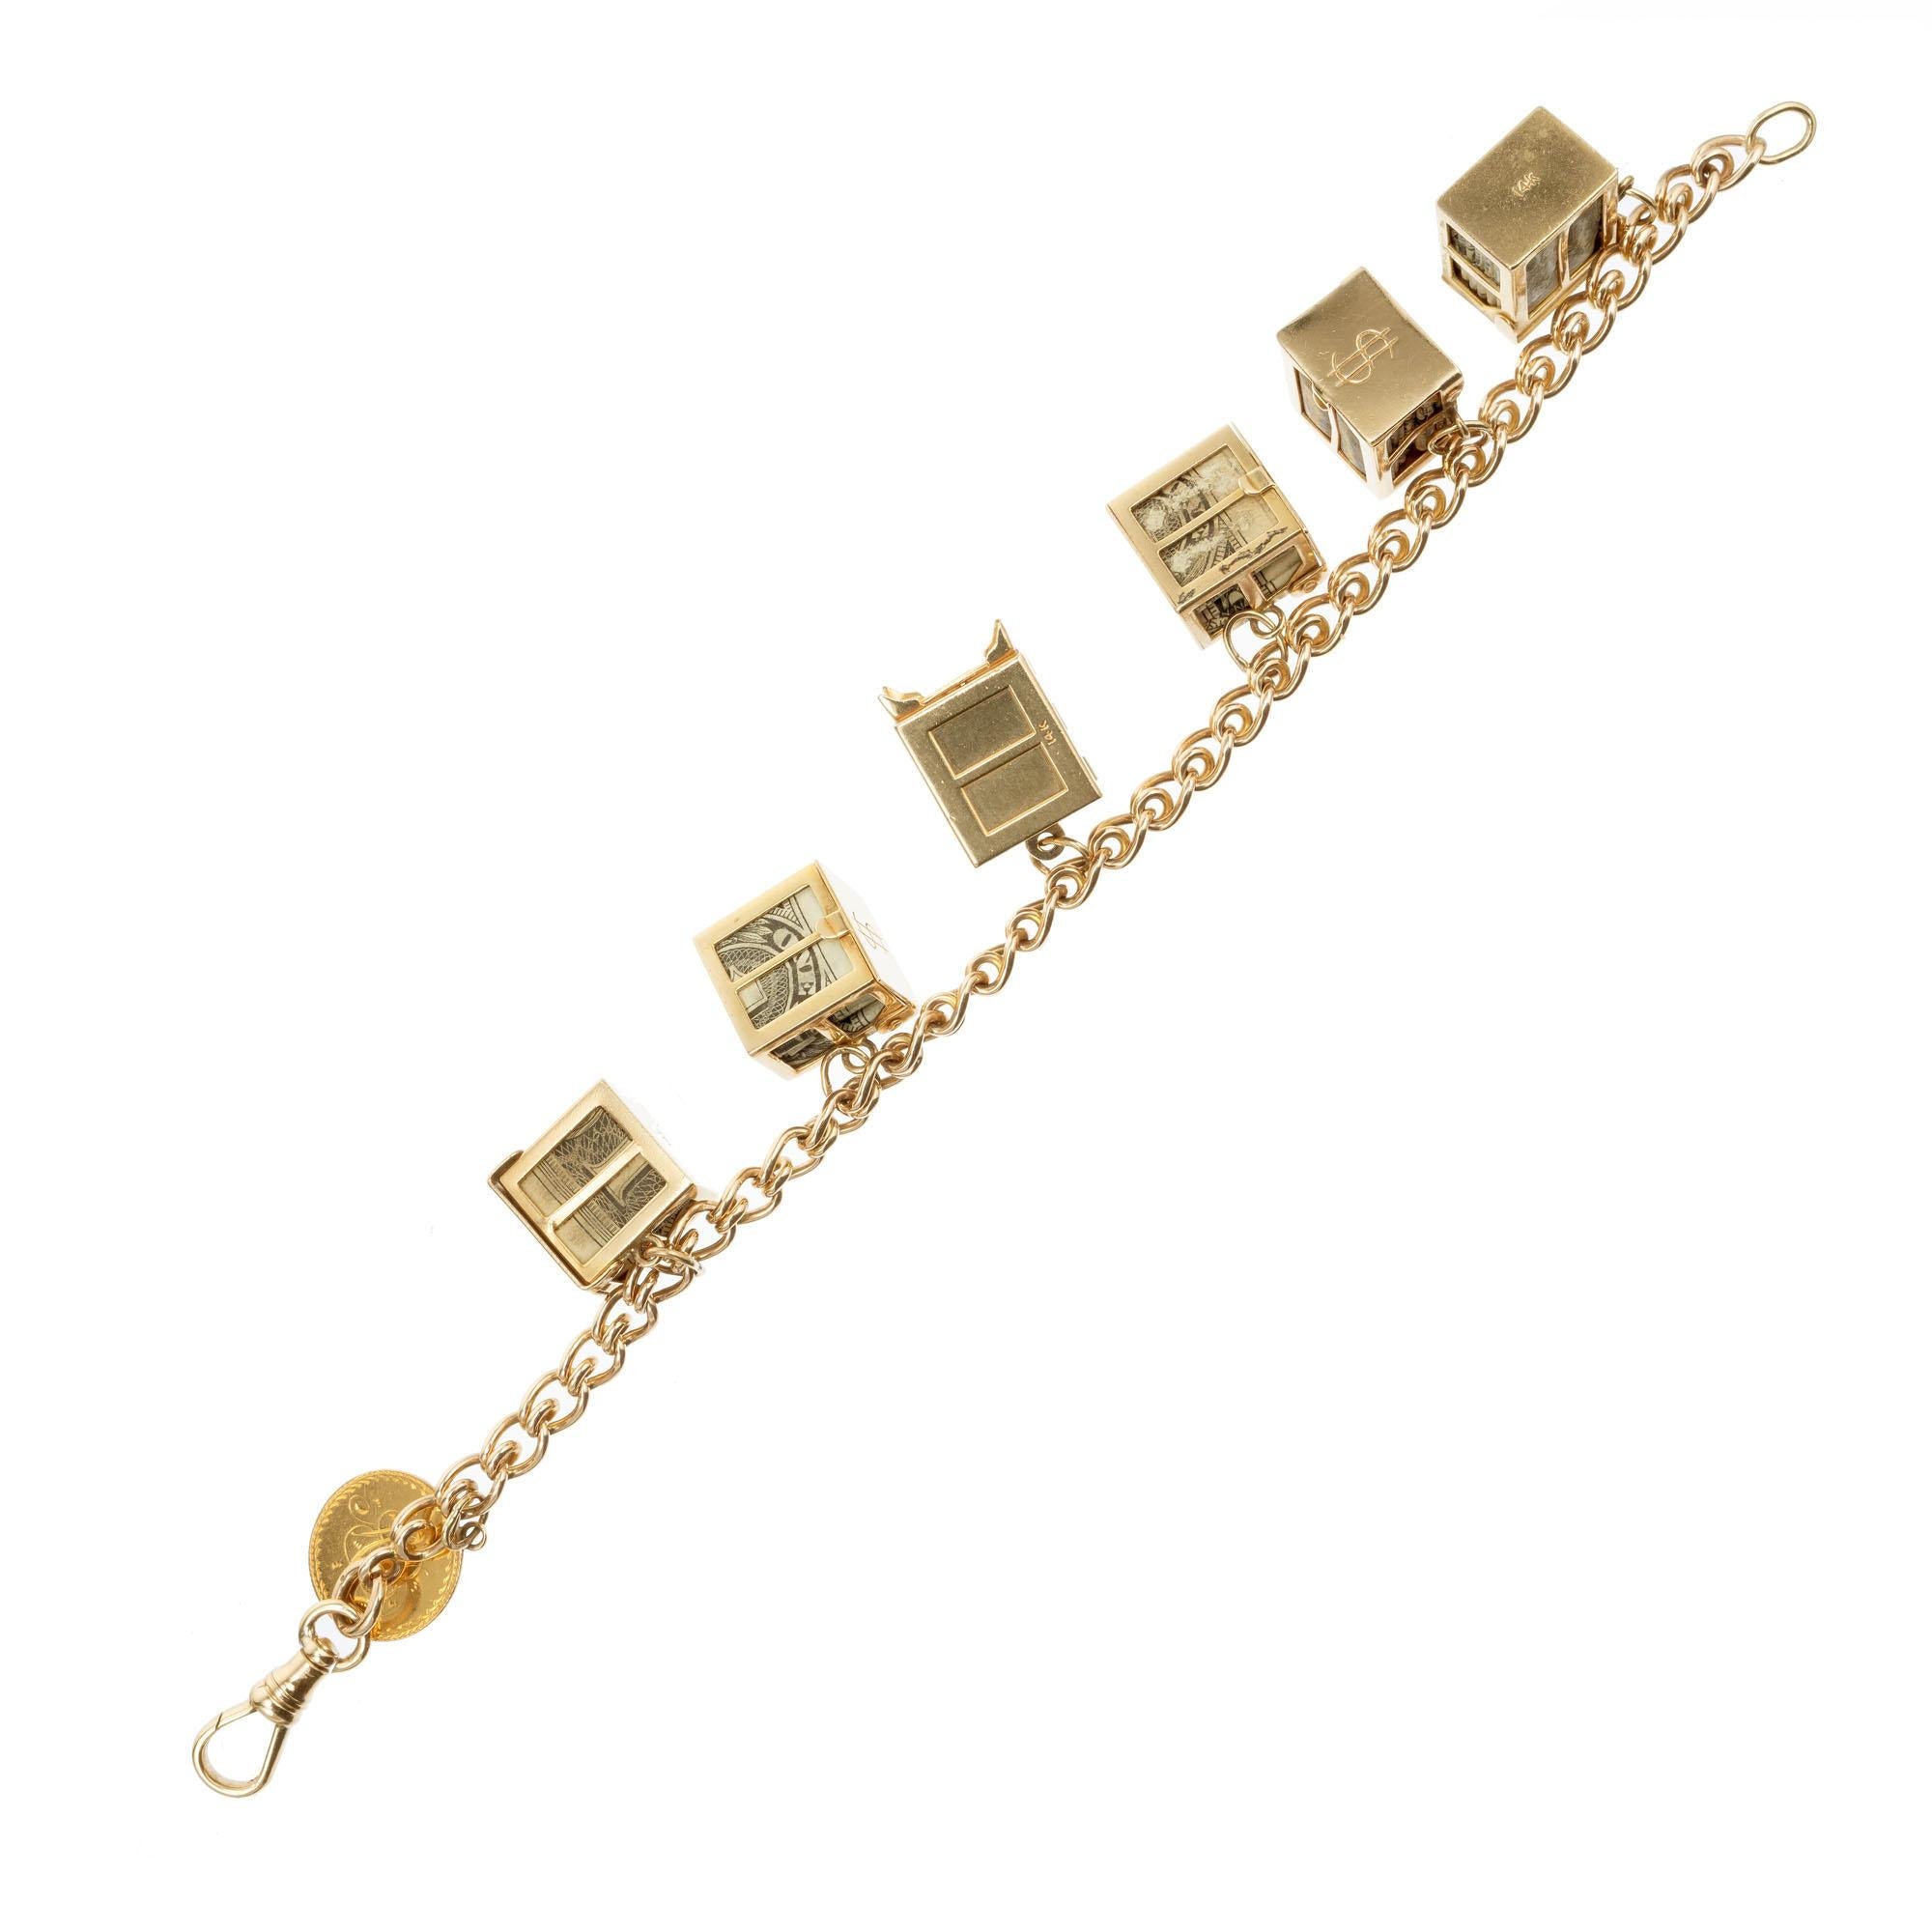 1960’s 14k gold mad money themed charm bracelet. Five mad money charms each with a folded dollar bill. 6 gold safes with an engraved 1852 gold coin. Handmade with swivel catch. 8 inches in length. 

14k yellow gold 
Stamped: 14k
36.2 grams
Bracelet: